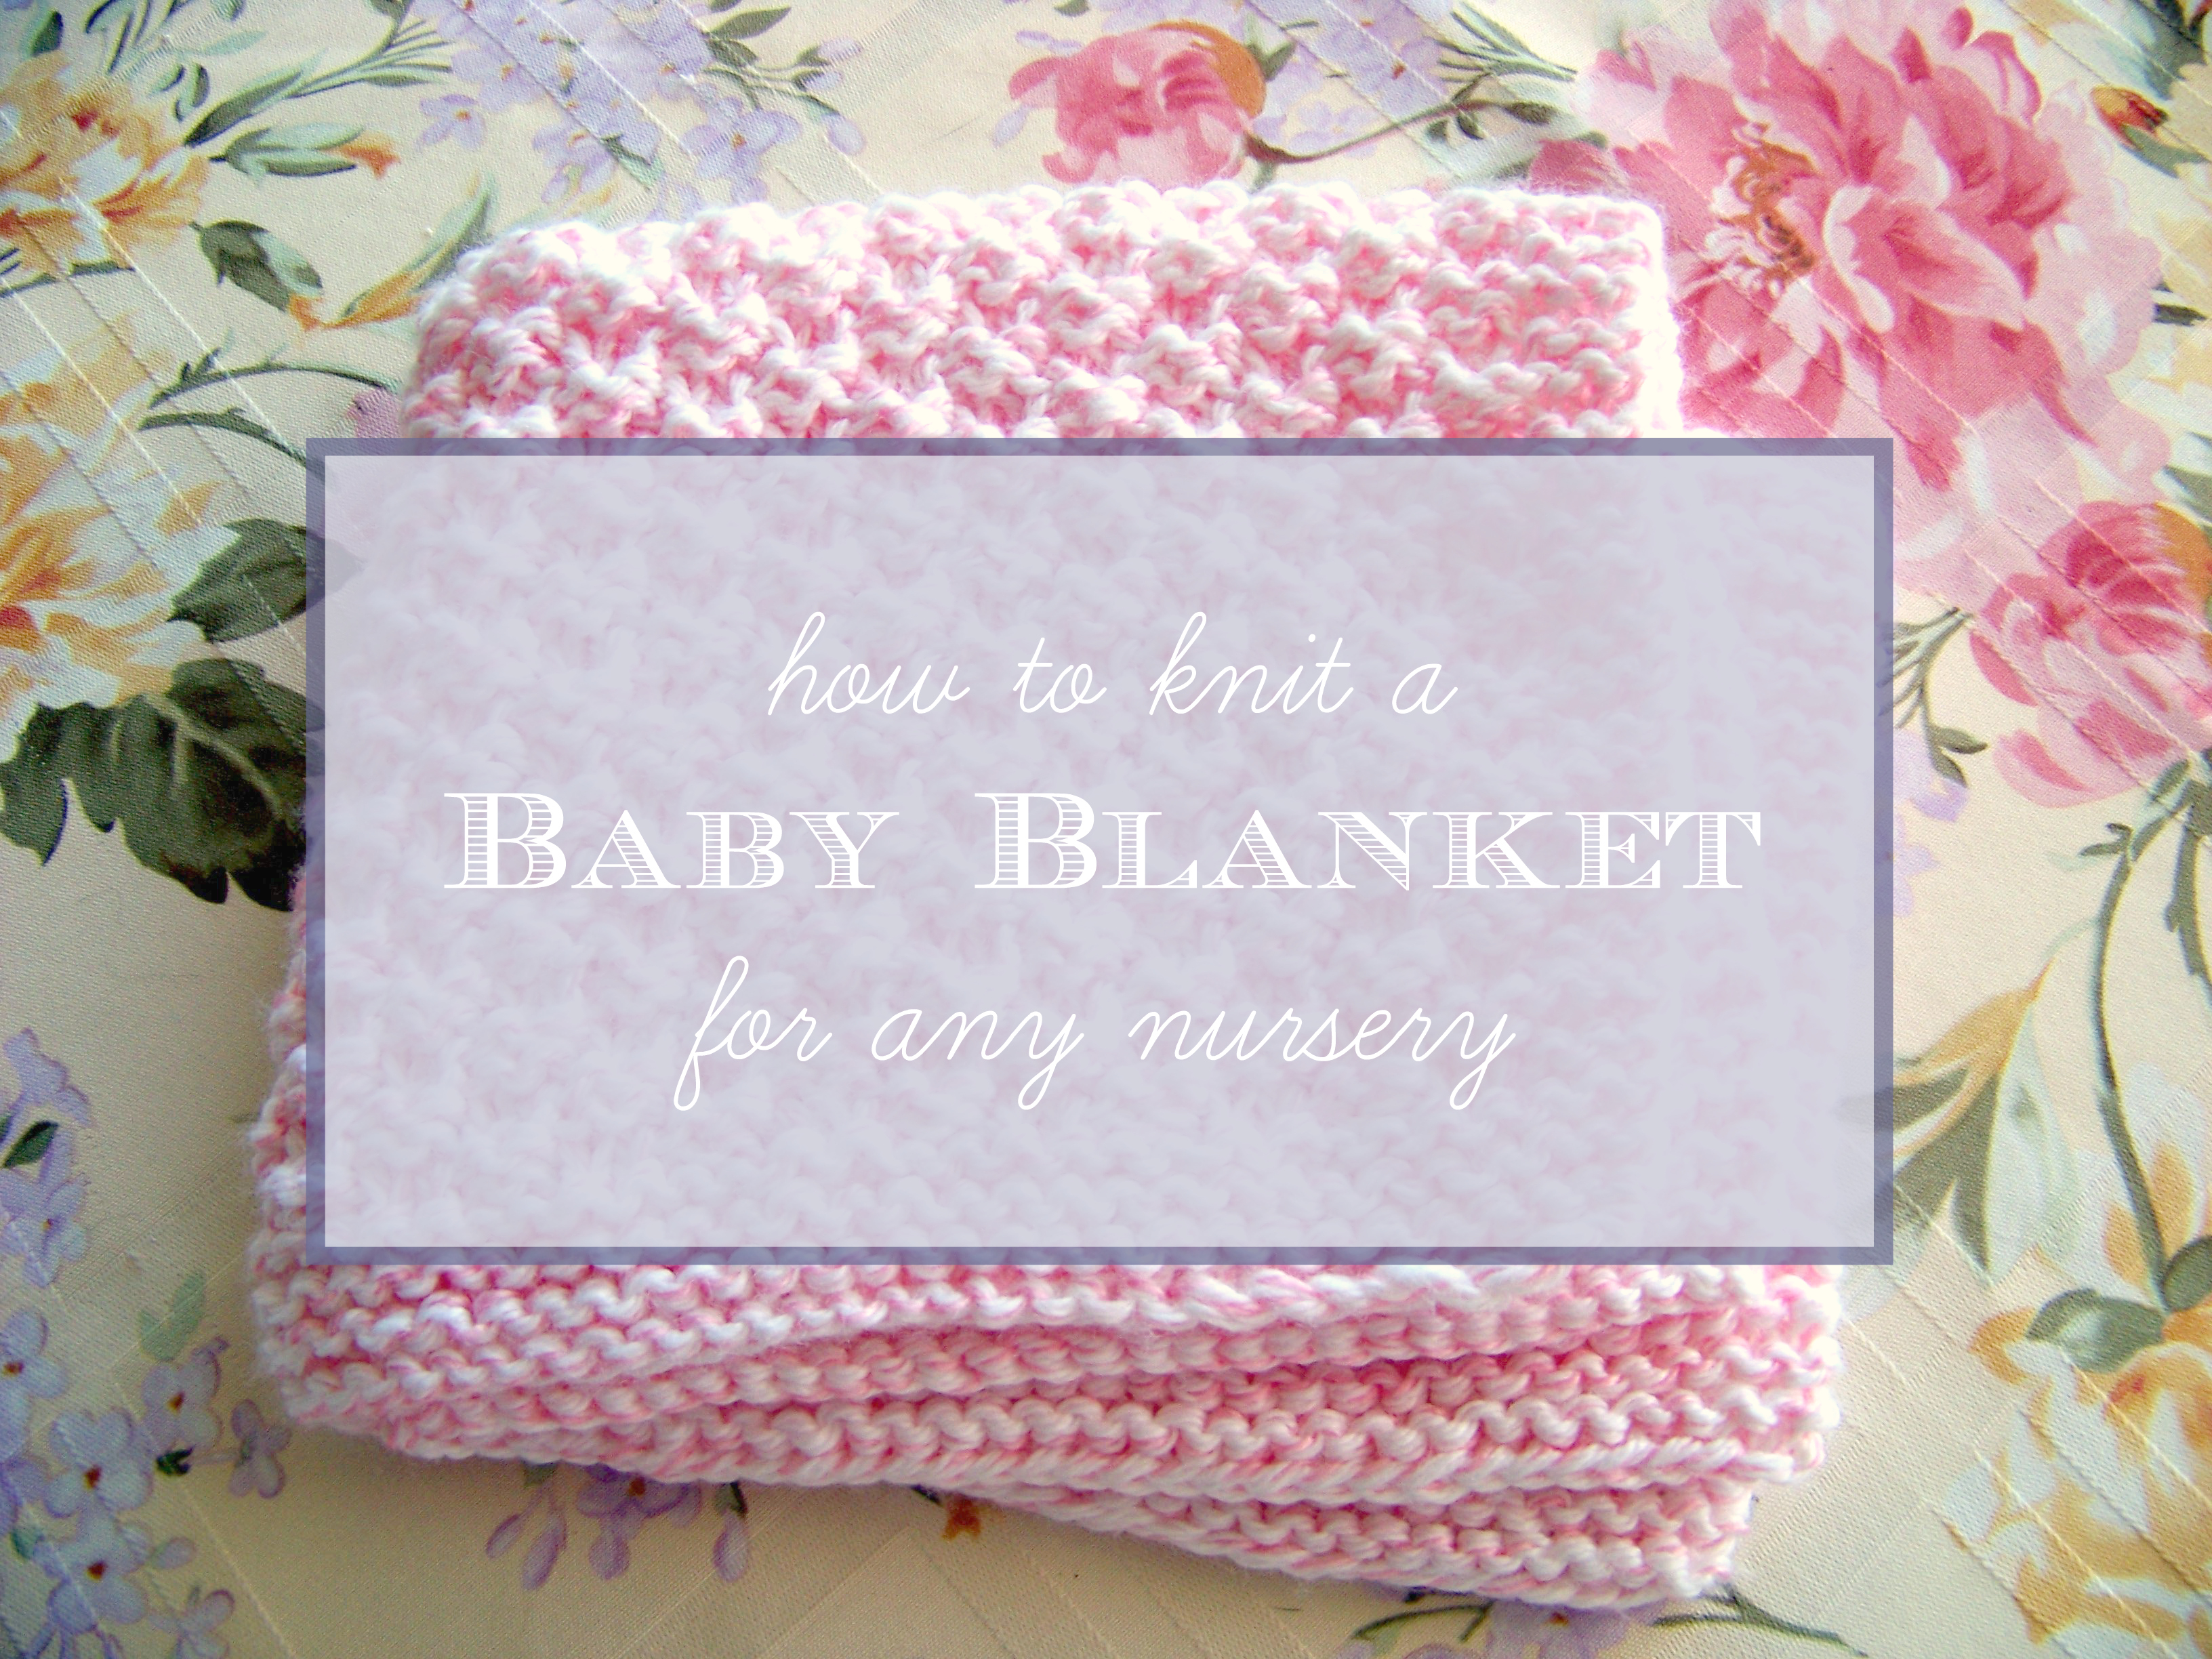 Knitting Baby Blankets Patterns How To Knit A Ba Blanket